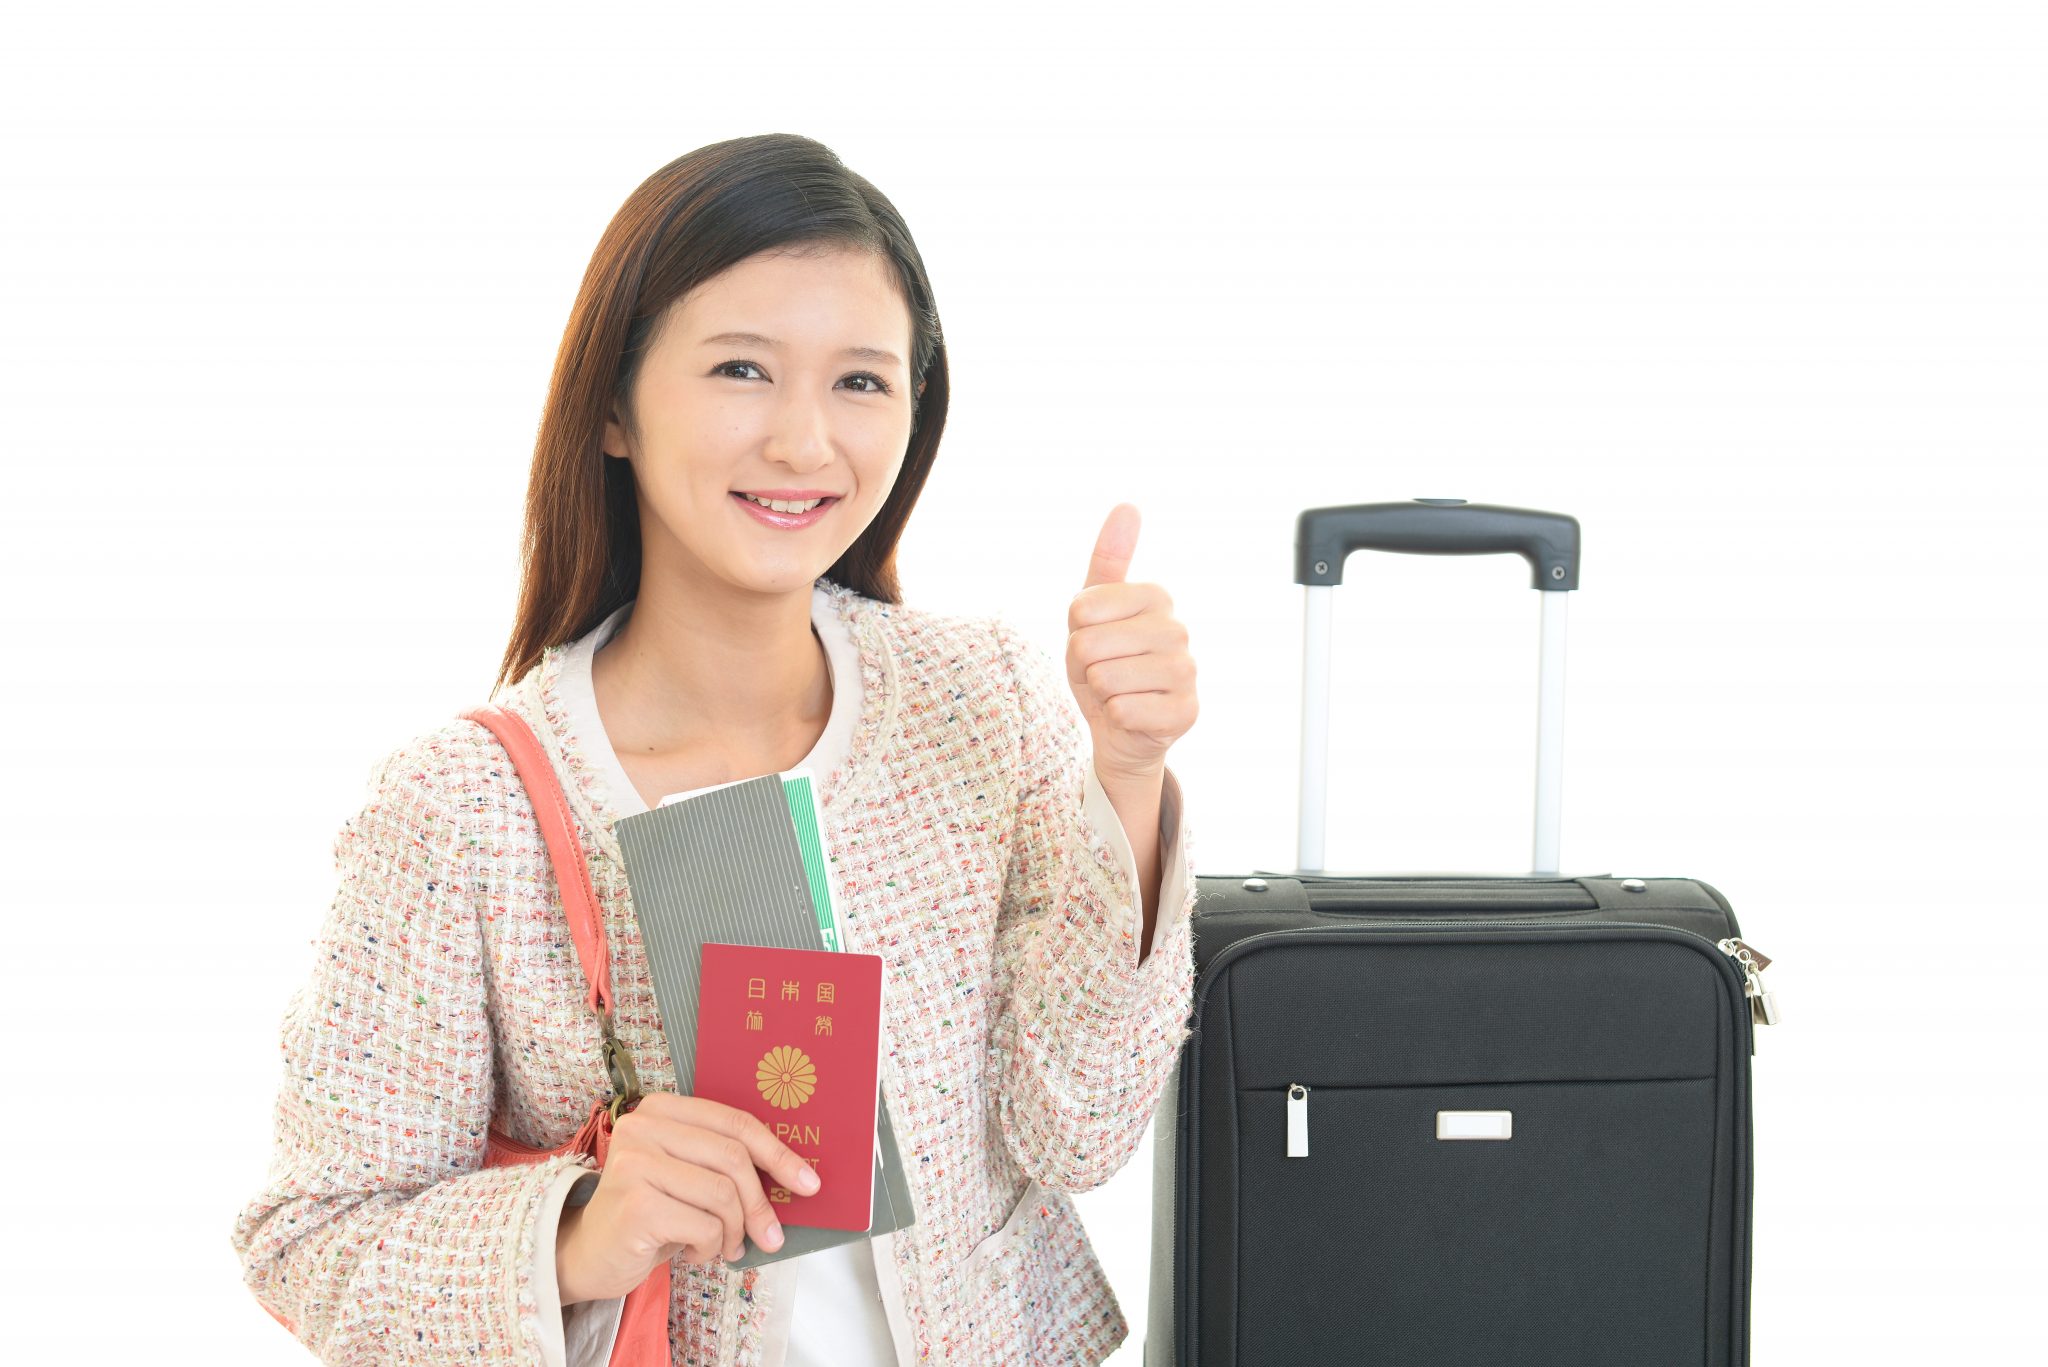 Vietnam Reissue Tourist Visa For Japan People From March 2022 | How To Apply Vietnam Tourist Visa From Japan 2022